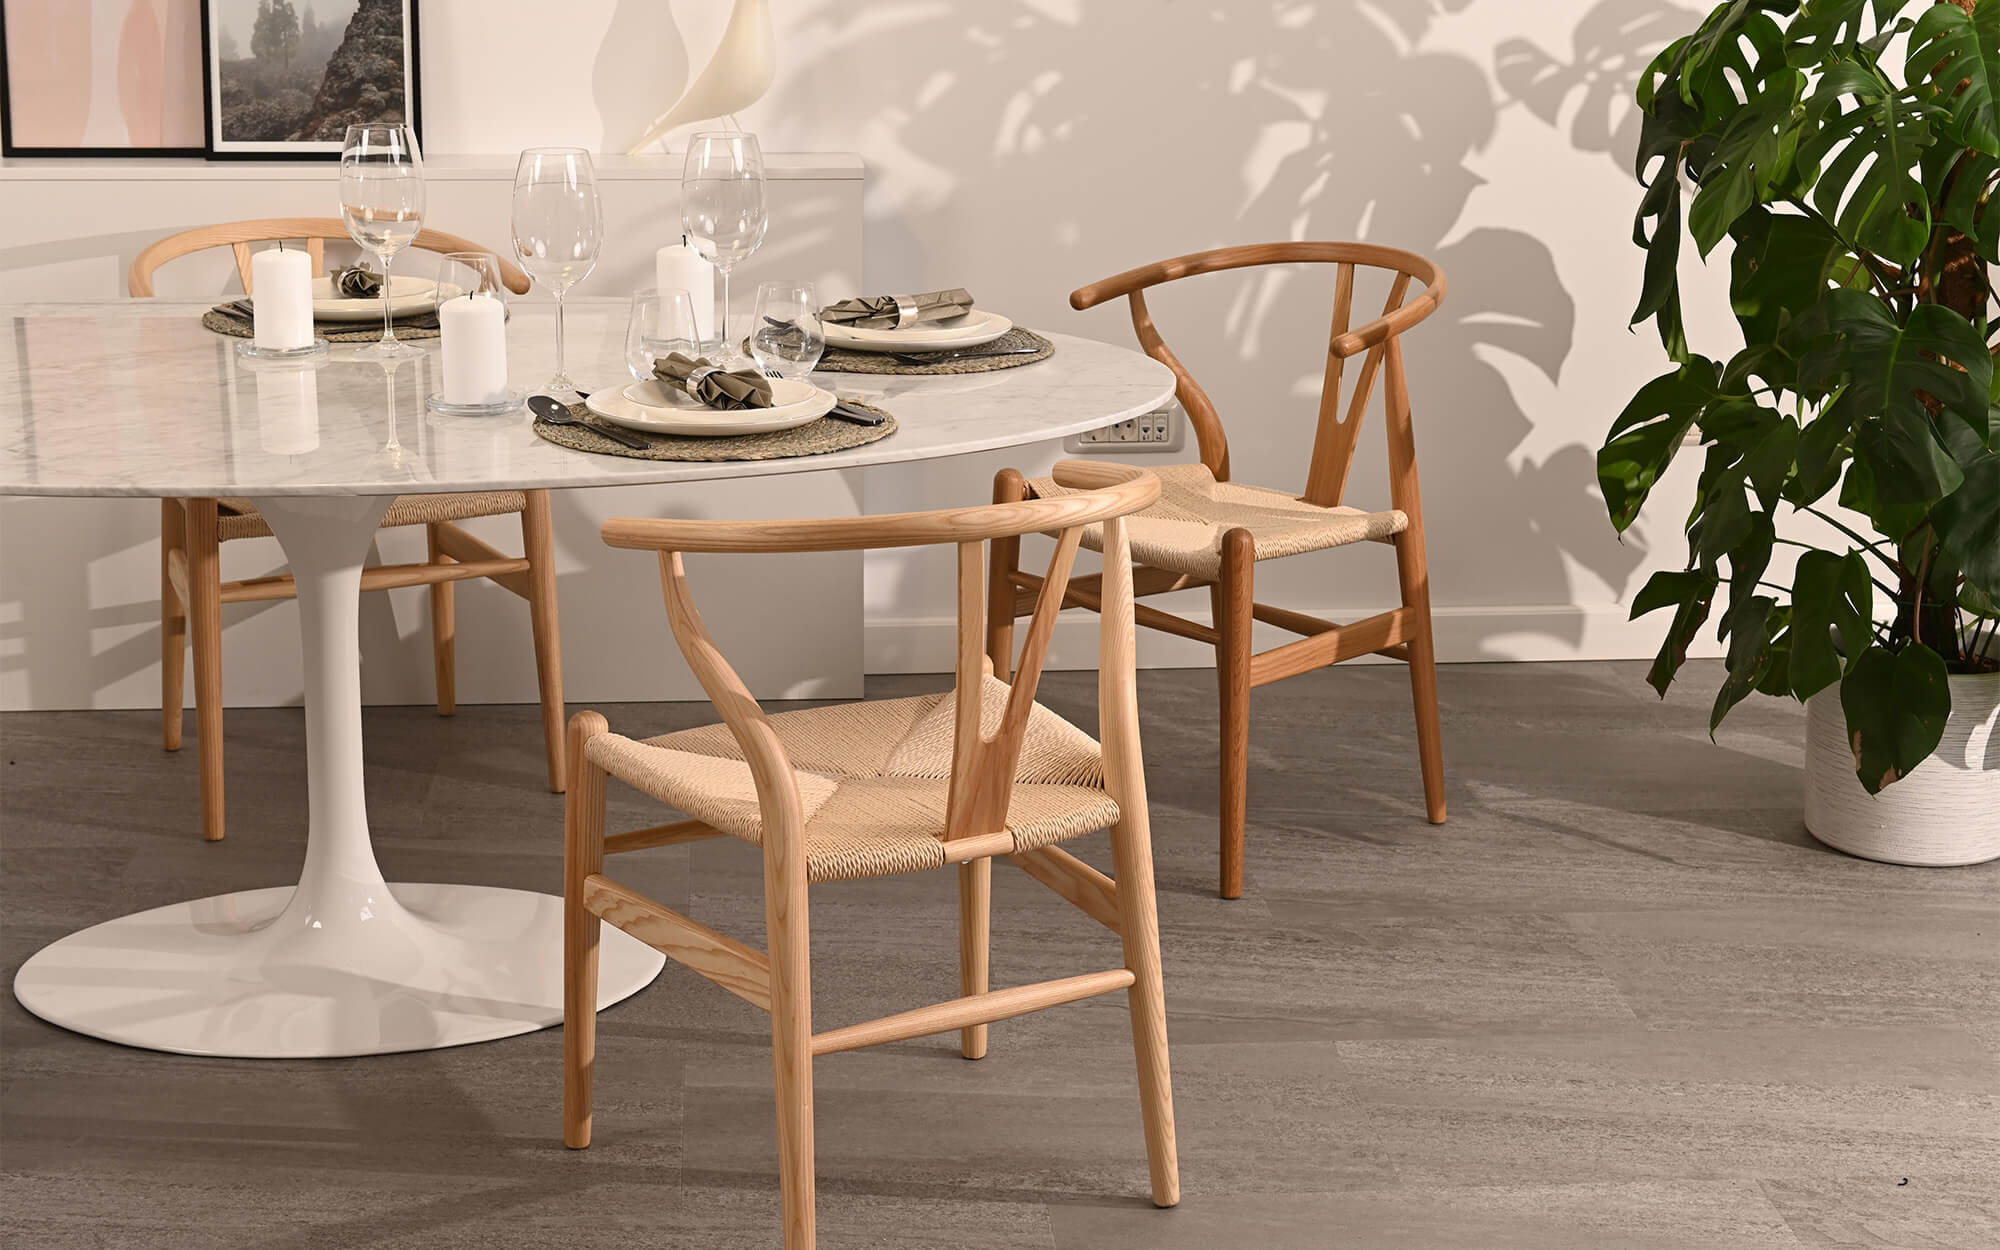 Dining Chair Styling Guide For Your Home – byBESPOEK